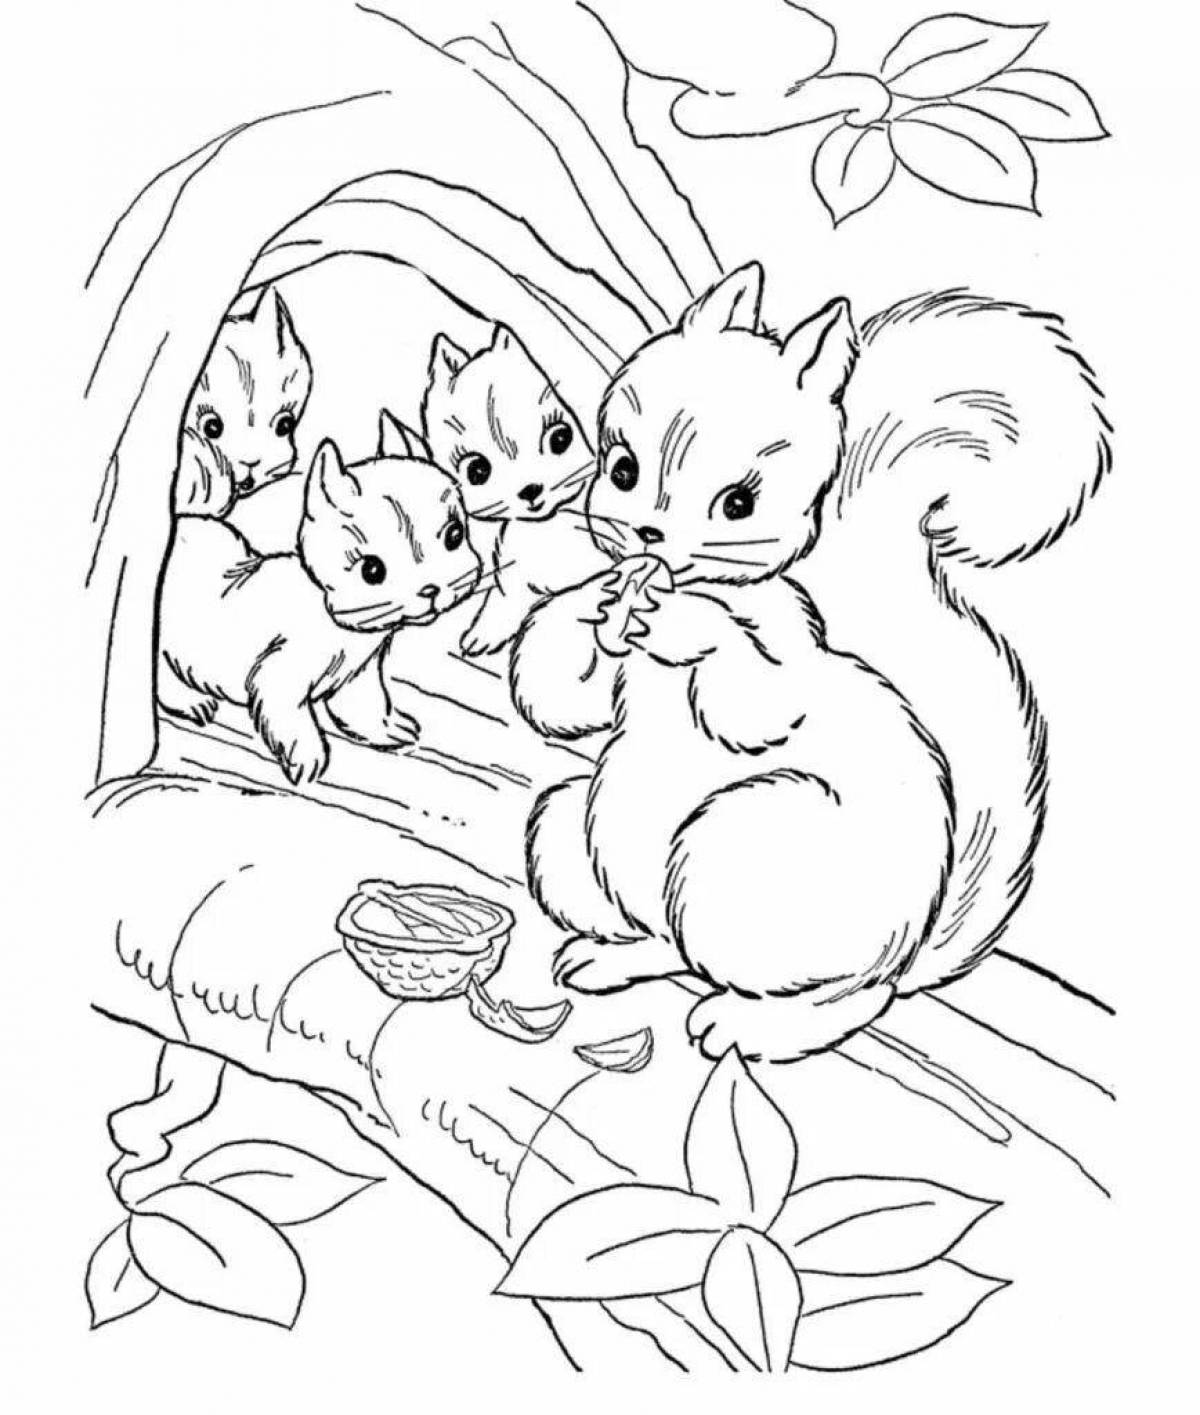 Fun coloring book of forest animals for 4-5 year olds